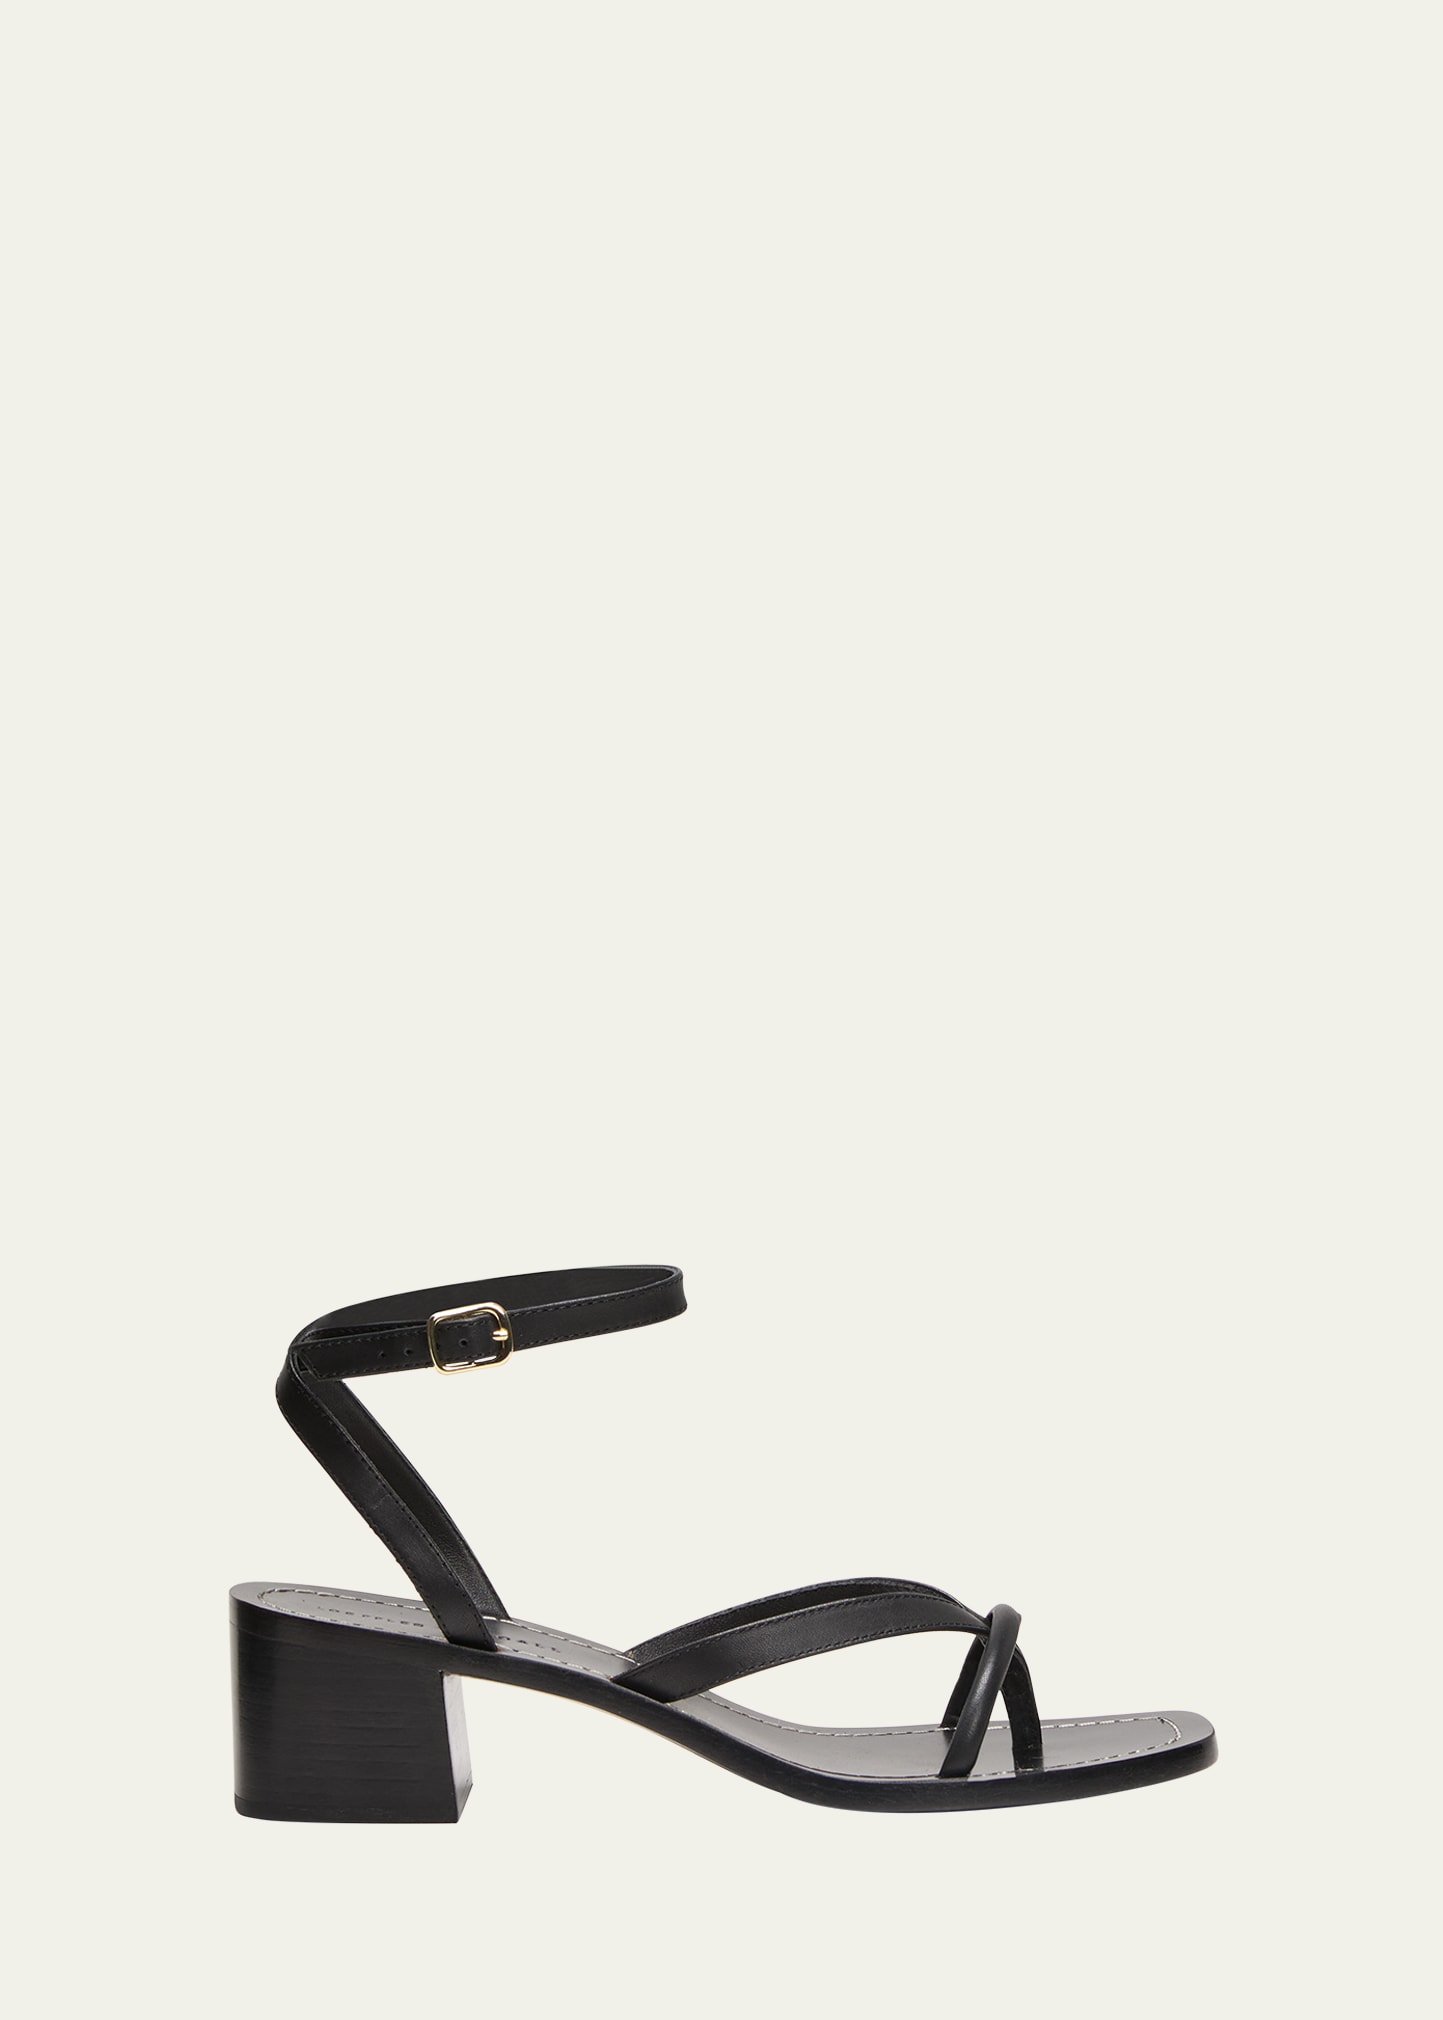 Eloise Leather Thong Ankle-Strap Sandals